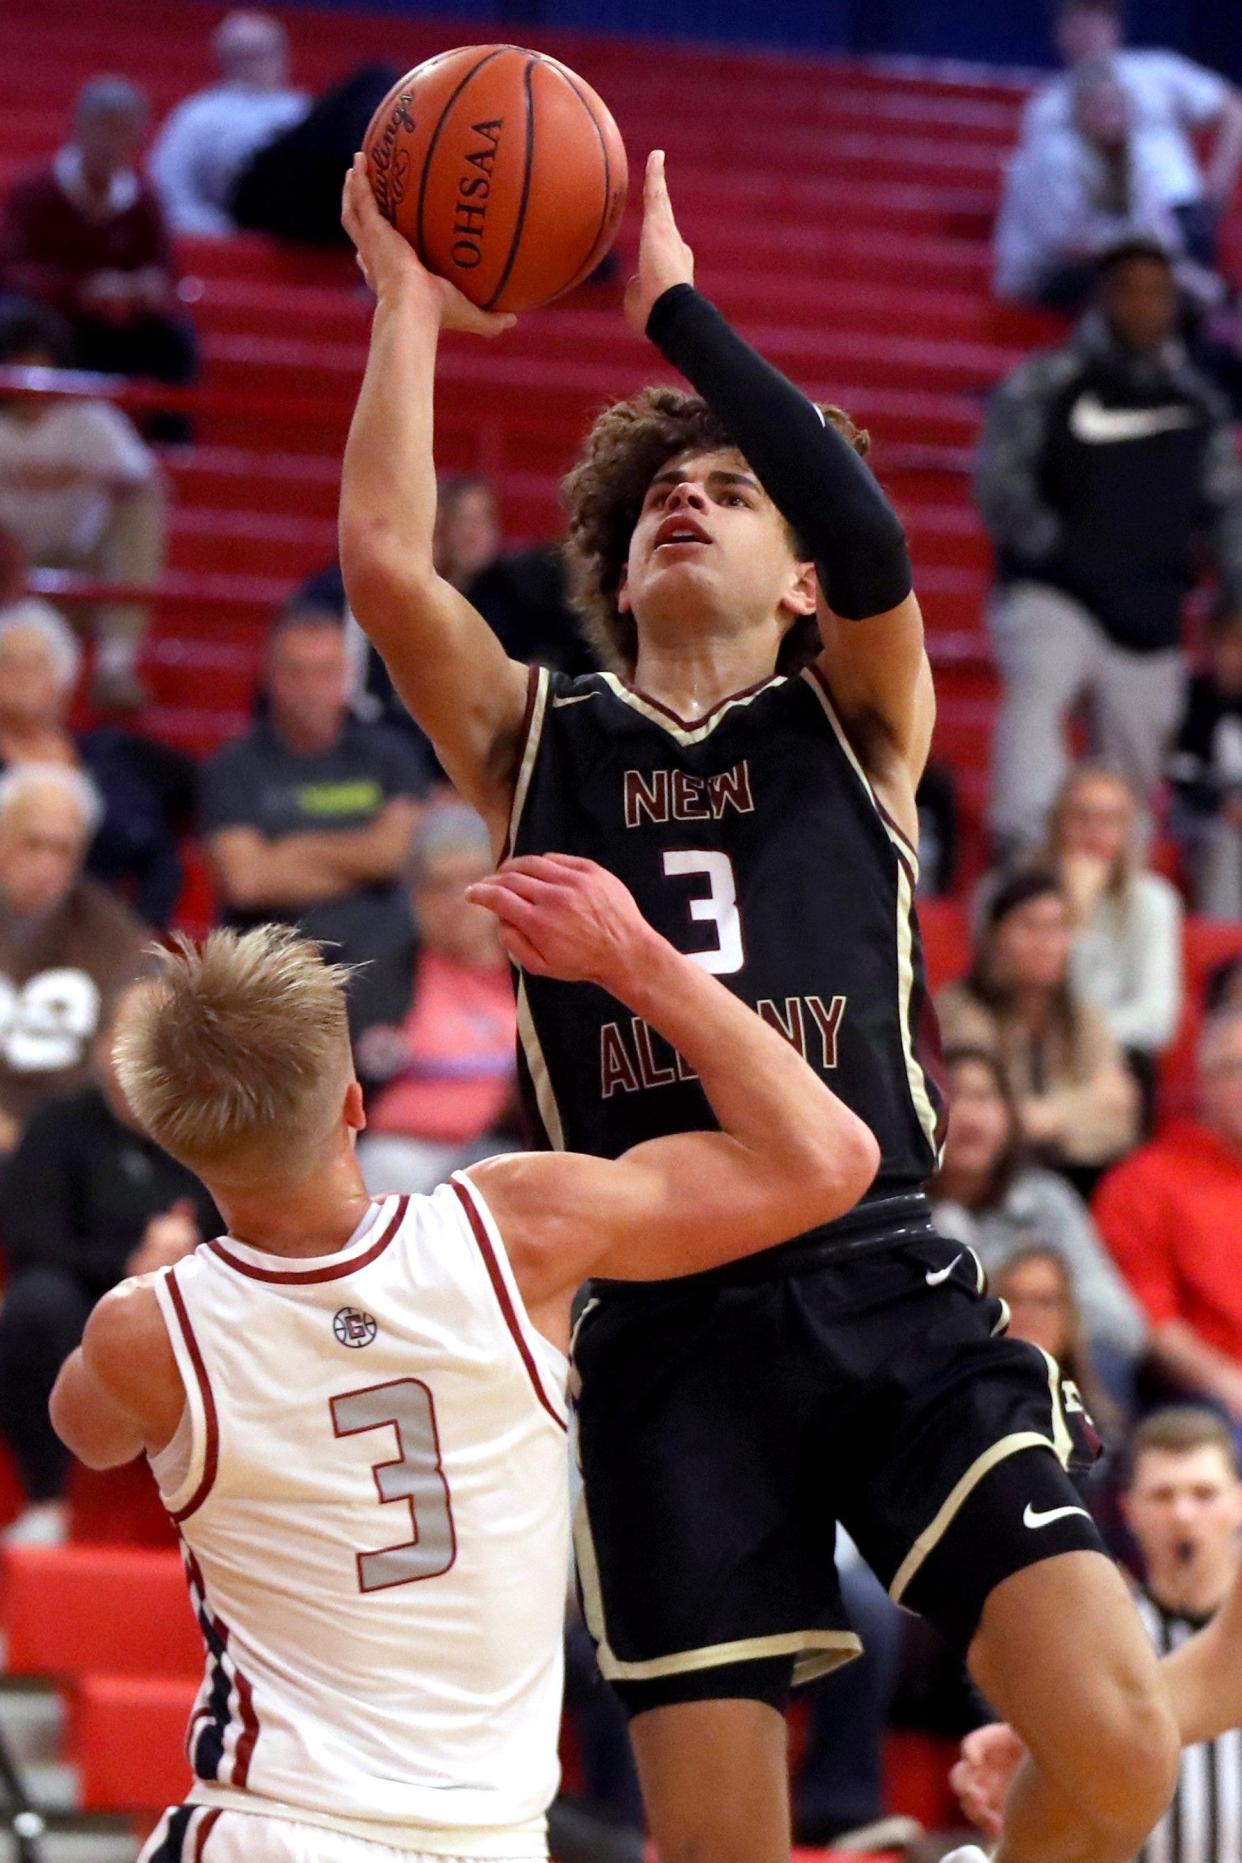 Braylen Nash, a 6-foot-3 sophomore guard, is in his second year as a starter for New Albany. He was averaging 10.9 points through 13 games after averaging 6.3 points as a freshman. The Eagles were 10-3 before playing Grove City on Jan. 21.